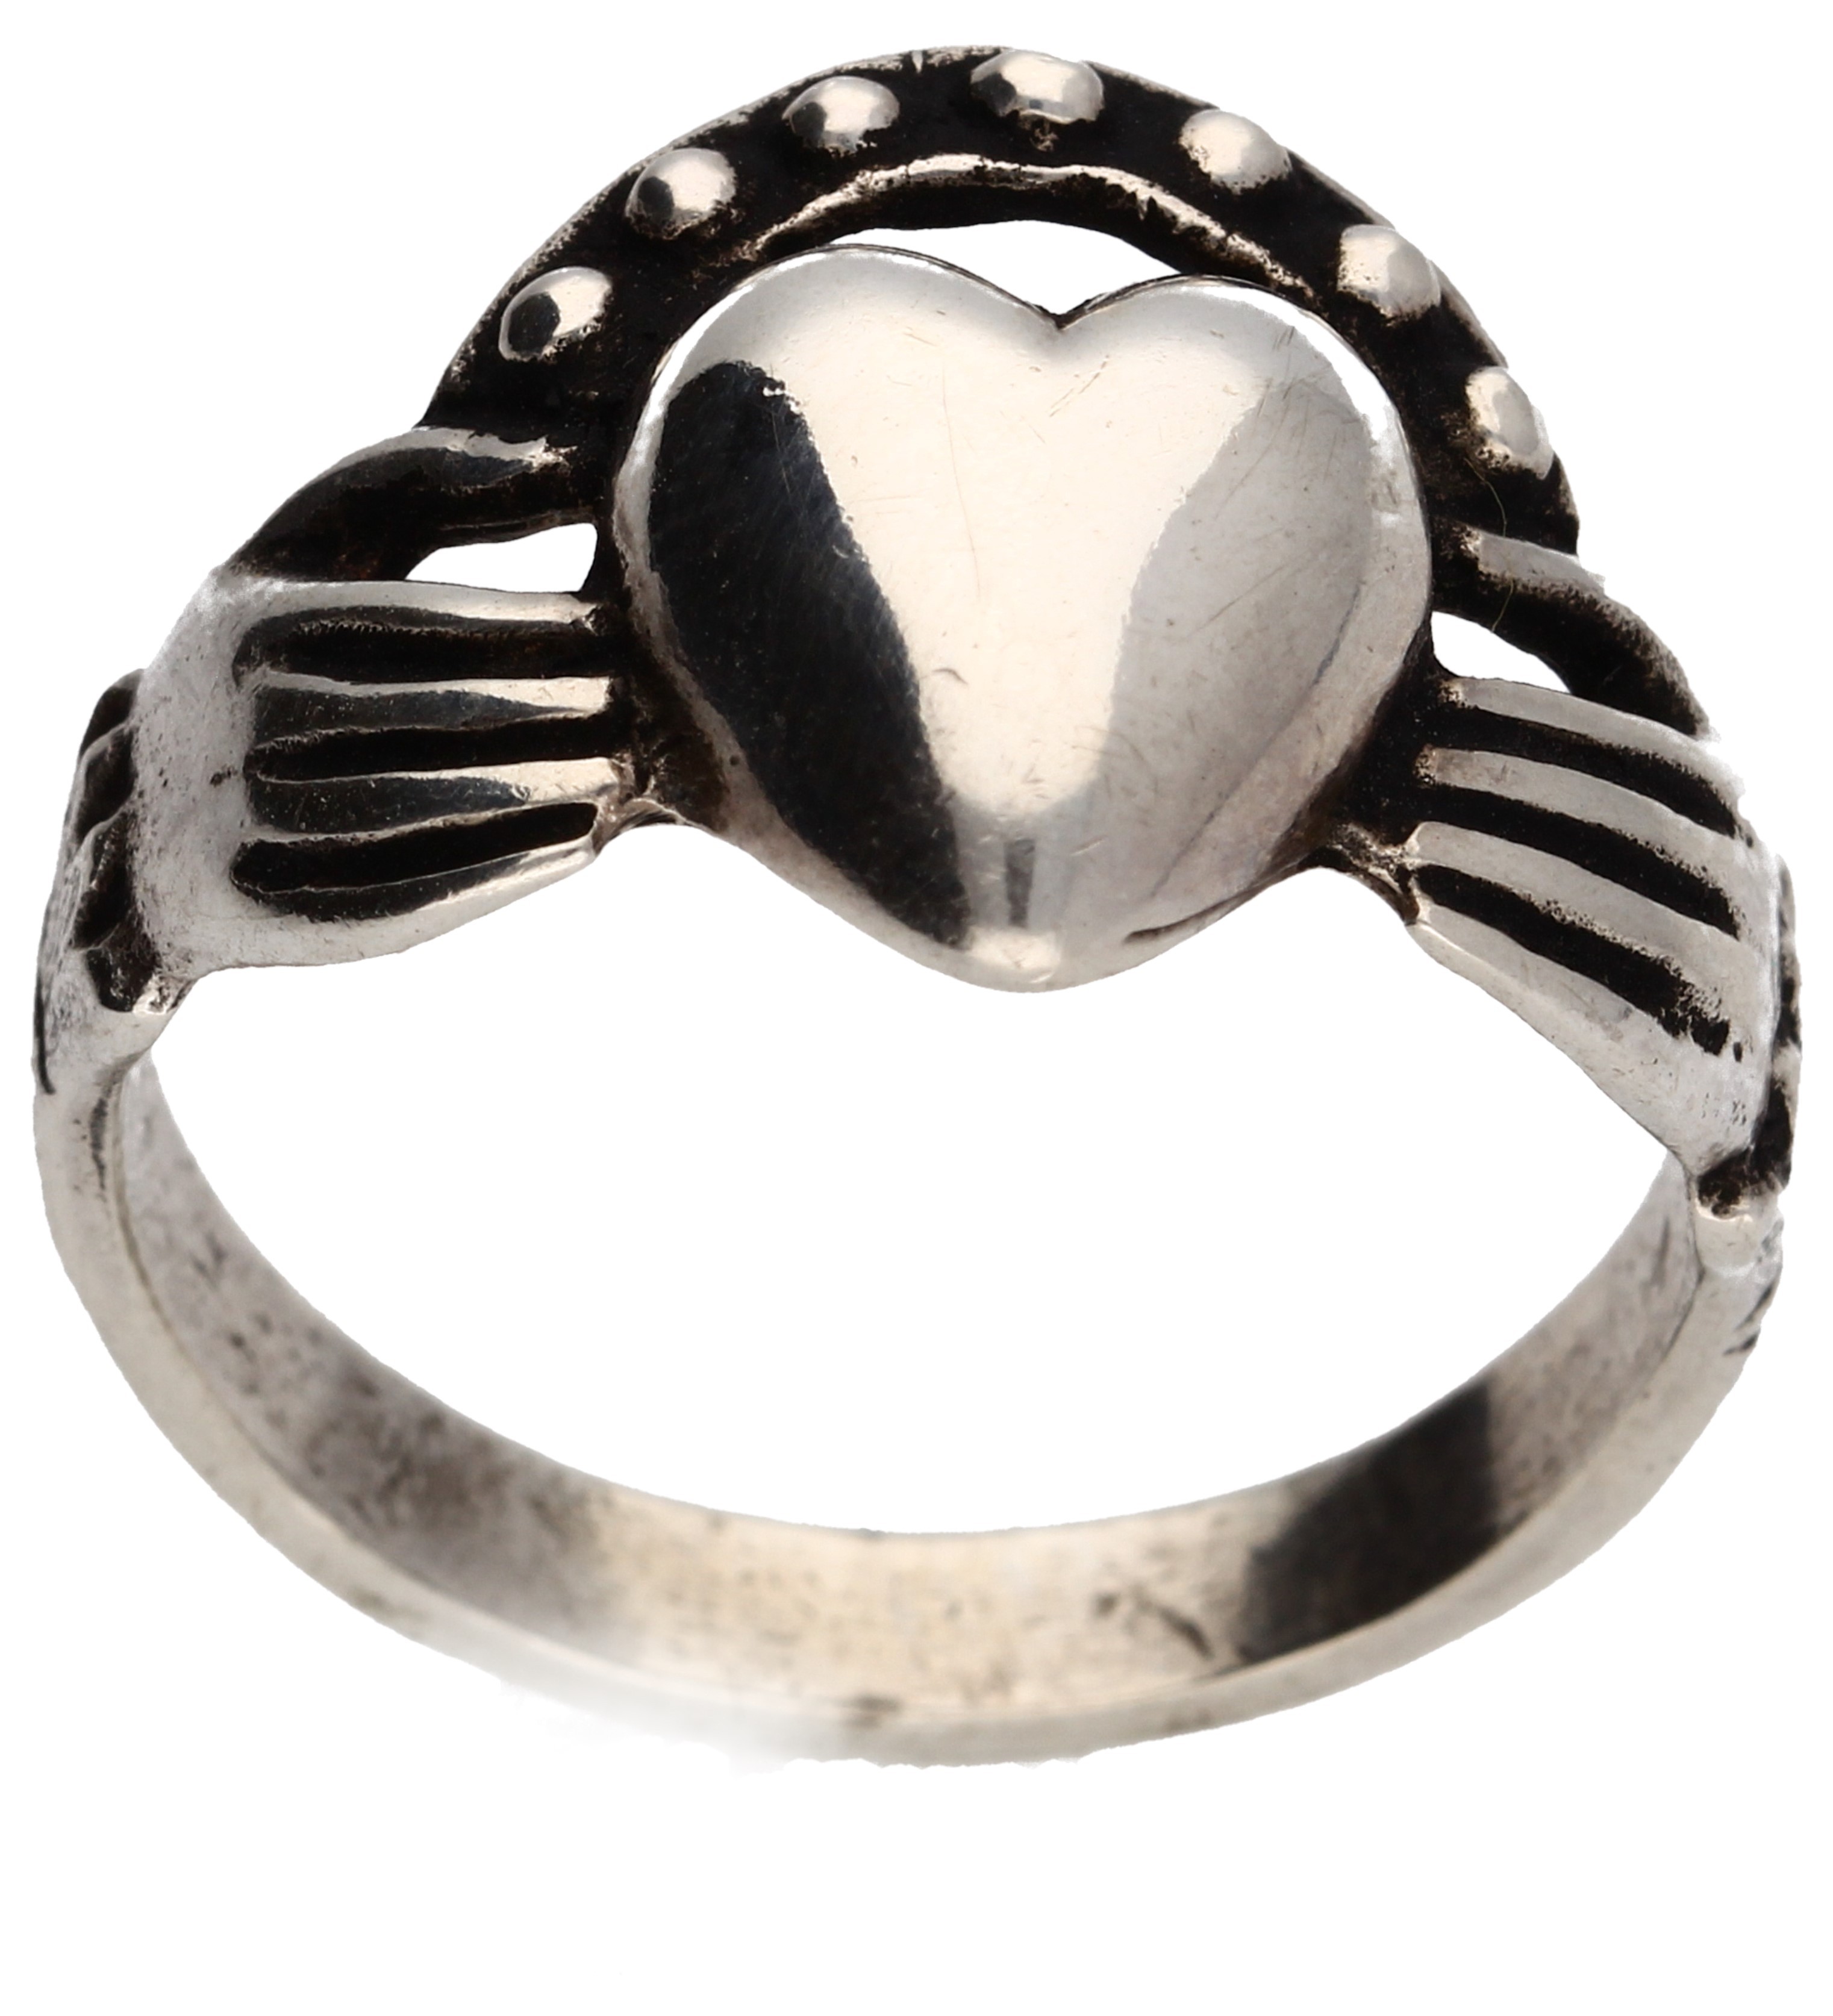 Claddagh Ring Meaning and History - Clean Origin Blog